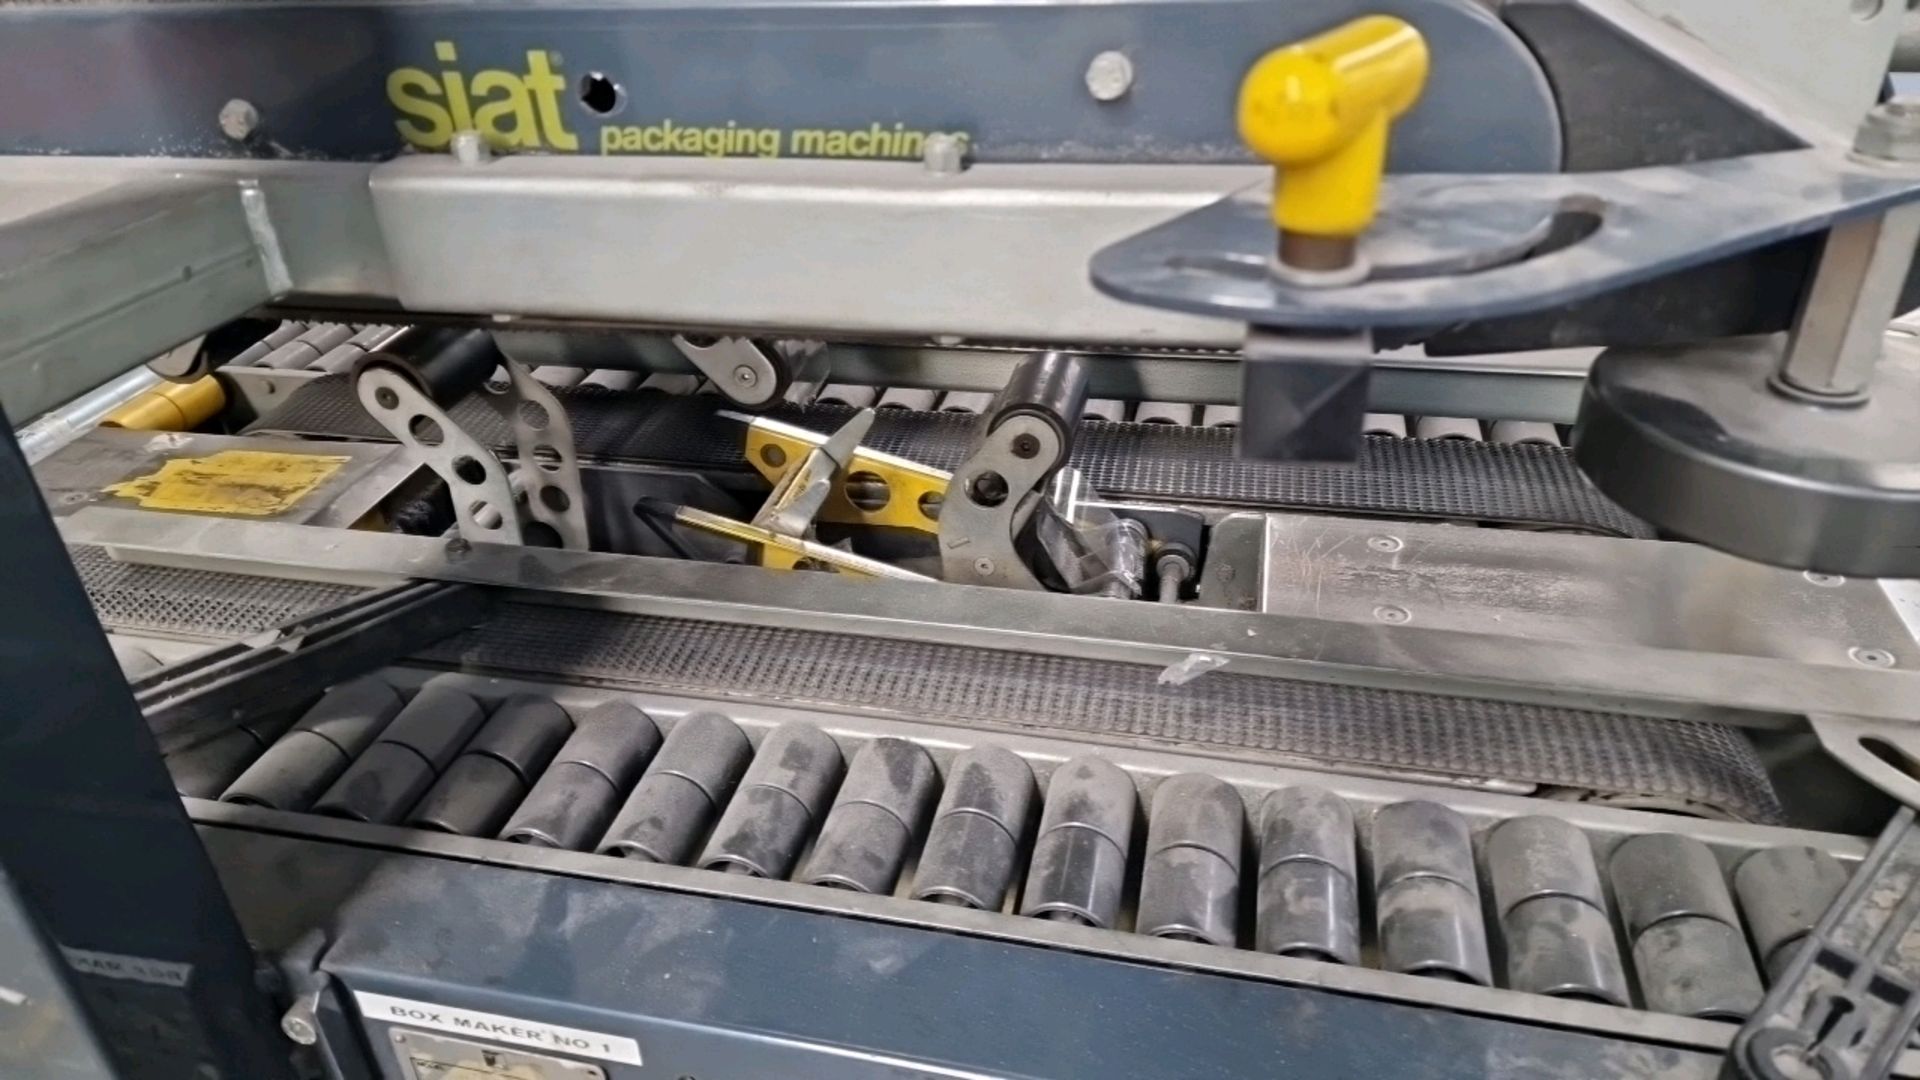 1994 Siat Packaging Machine - Image 7 of 10